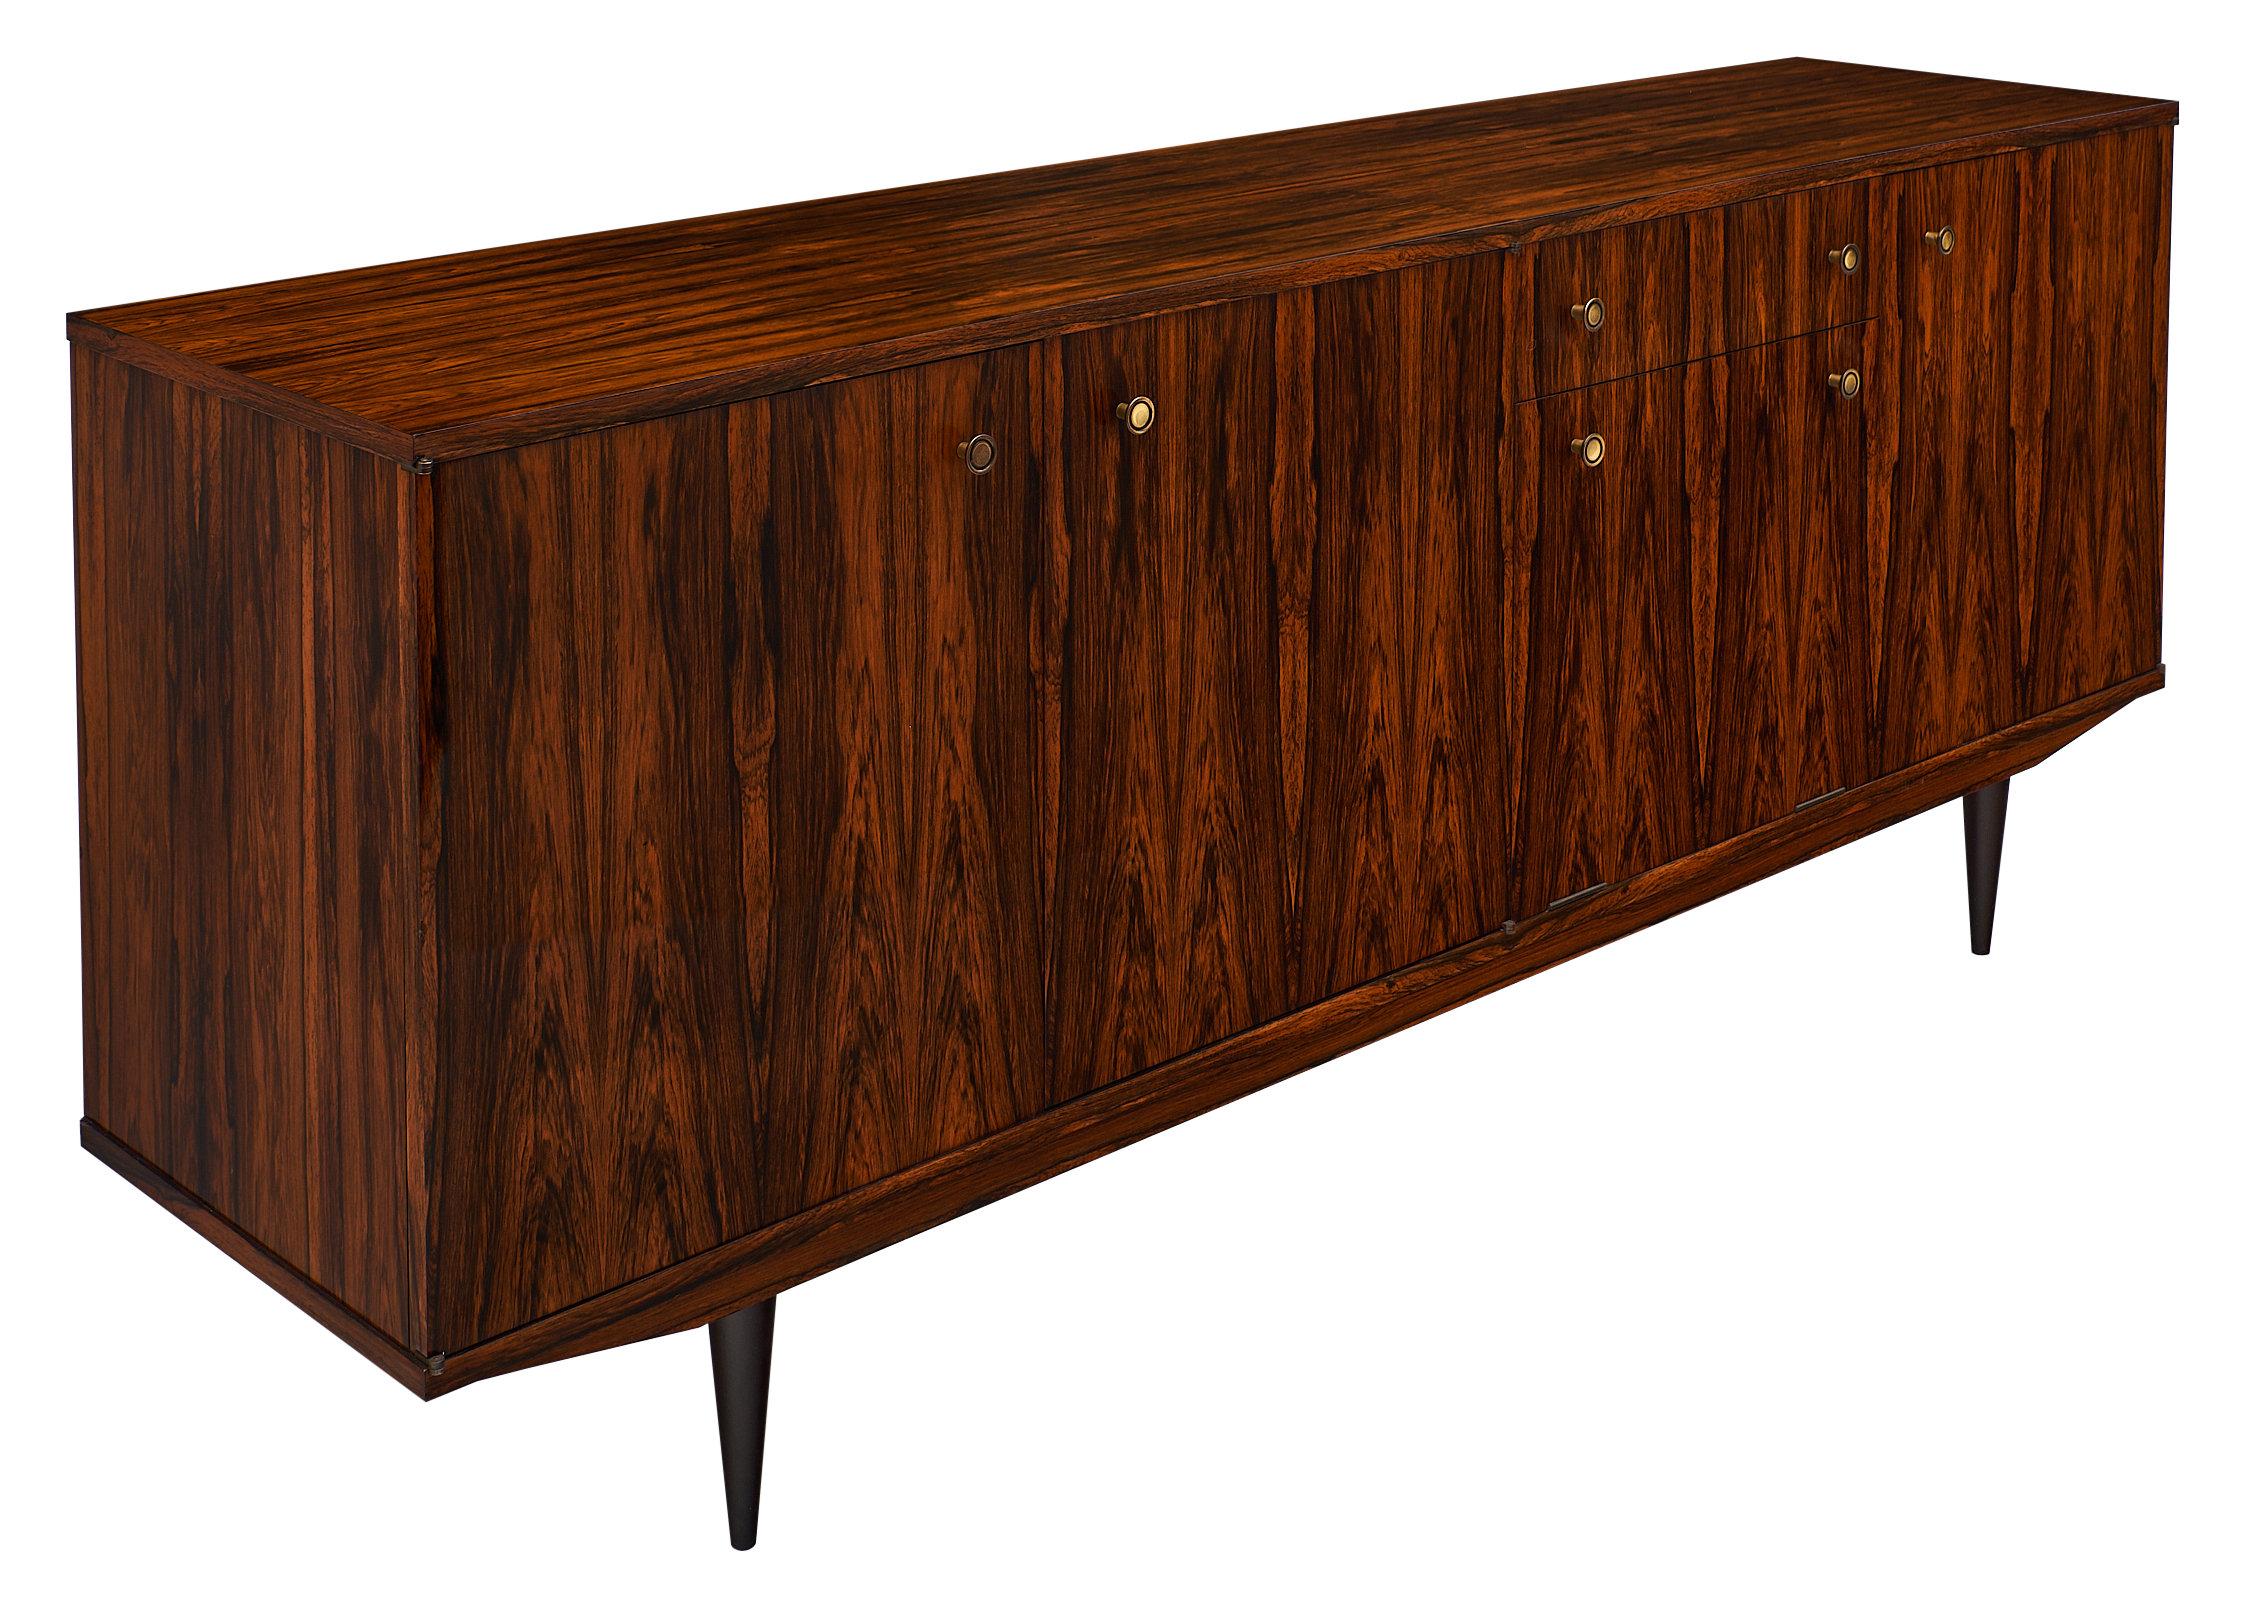 French vintage Macassar credenza with original lacquered finish, tapered legs and brass pull hardware. This stunning buffet has two door compartments that open to adjustable shelves, one unique drop-down compartment that opens to a bar area with a